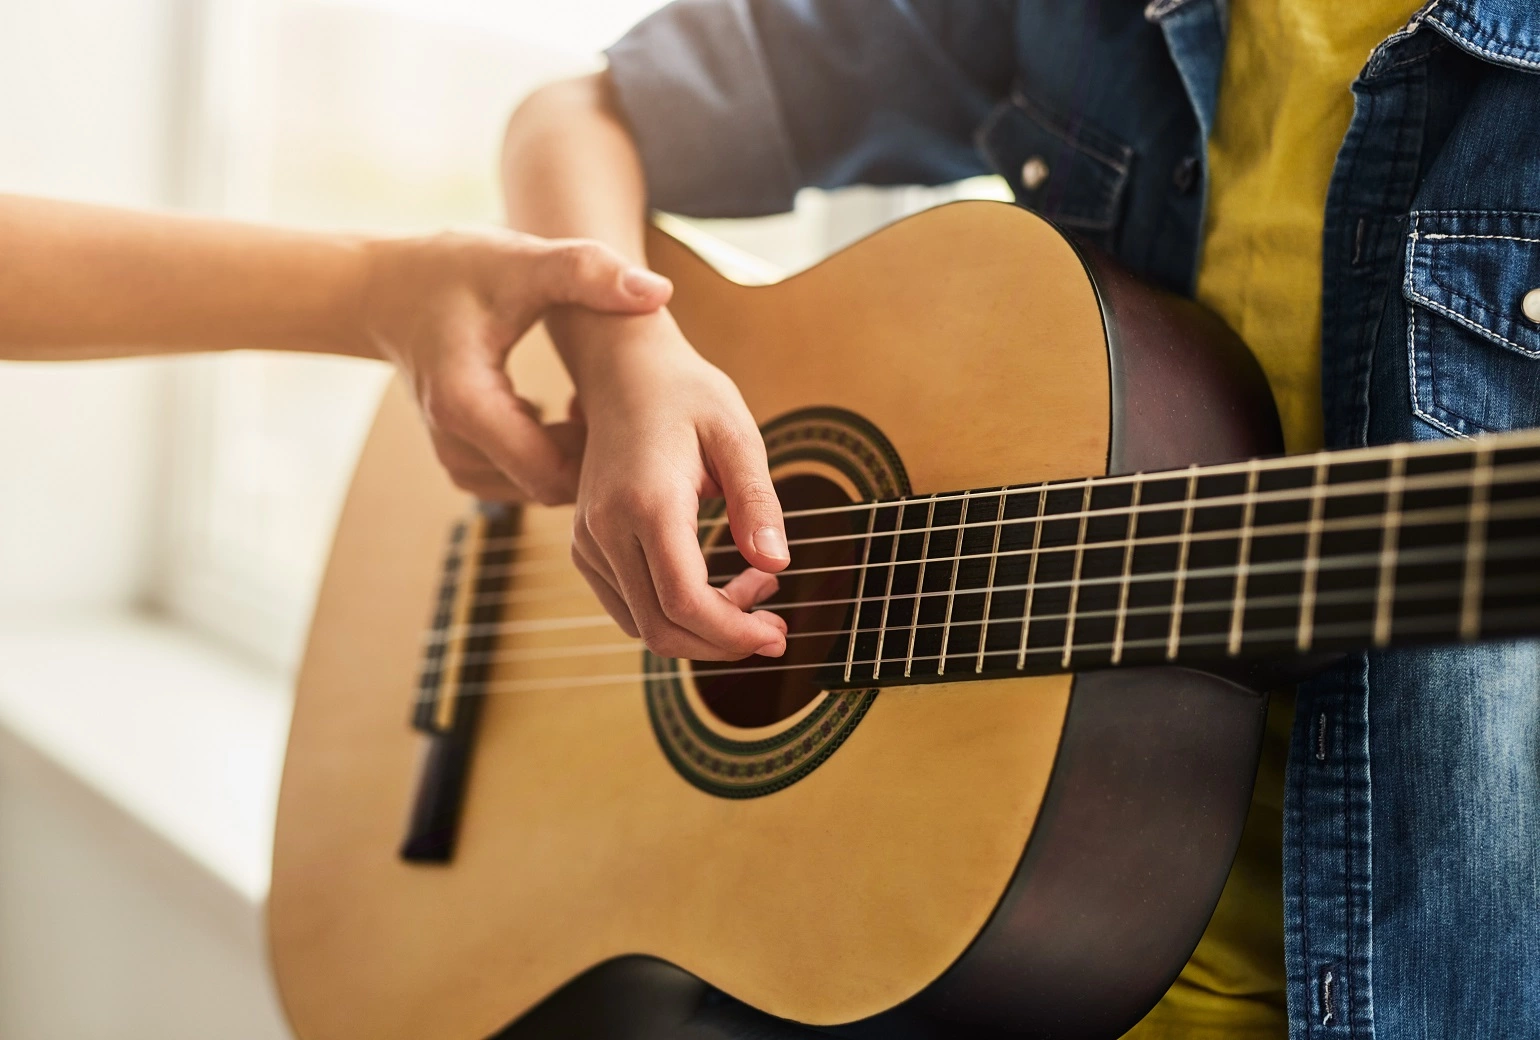 Learning an instrument: When should one start playing the guitar?￼